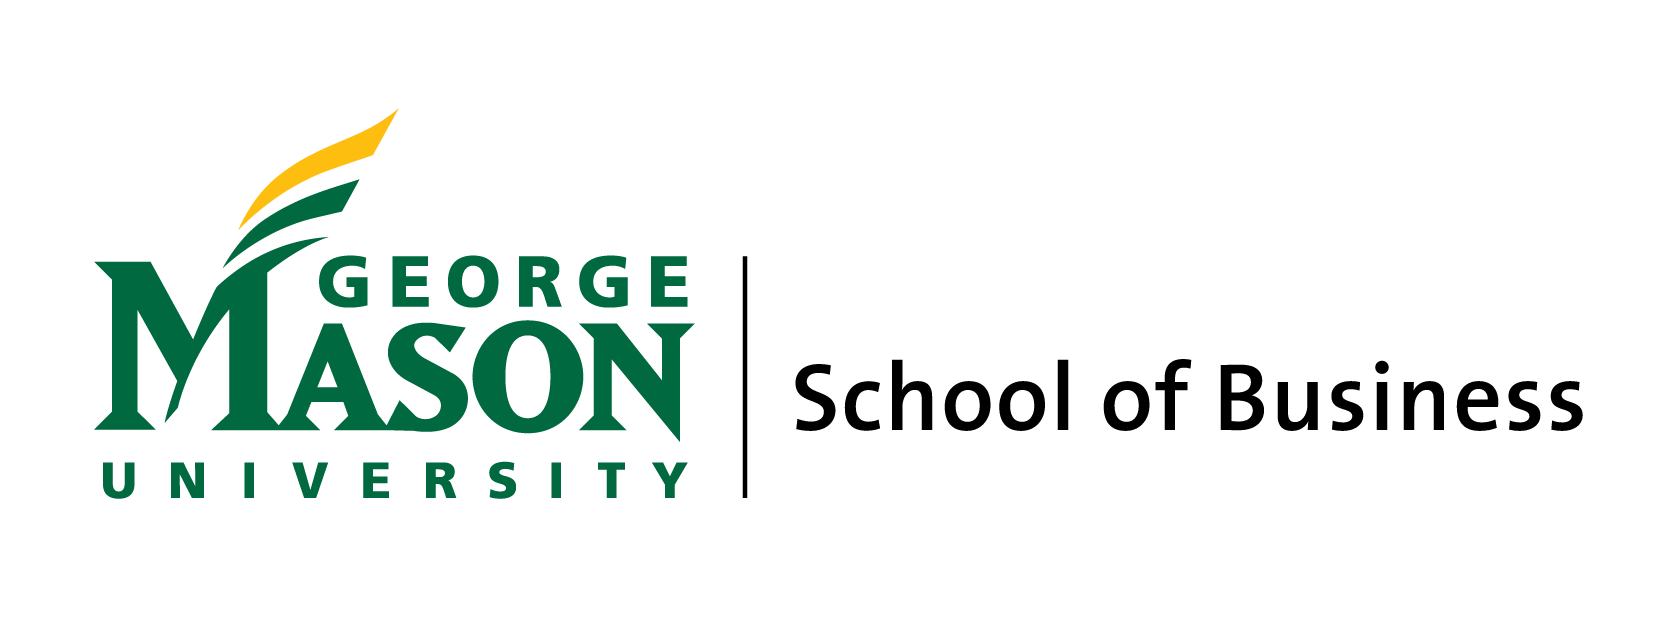 Image link to the School of Management at George Mason University